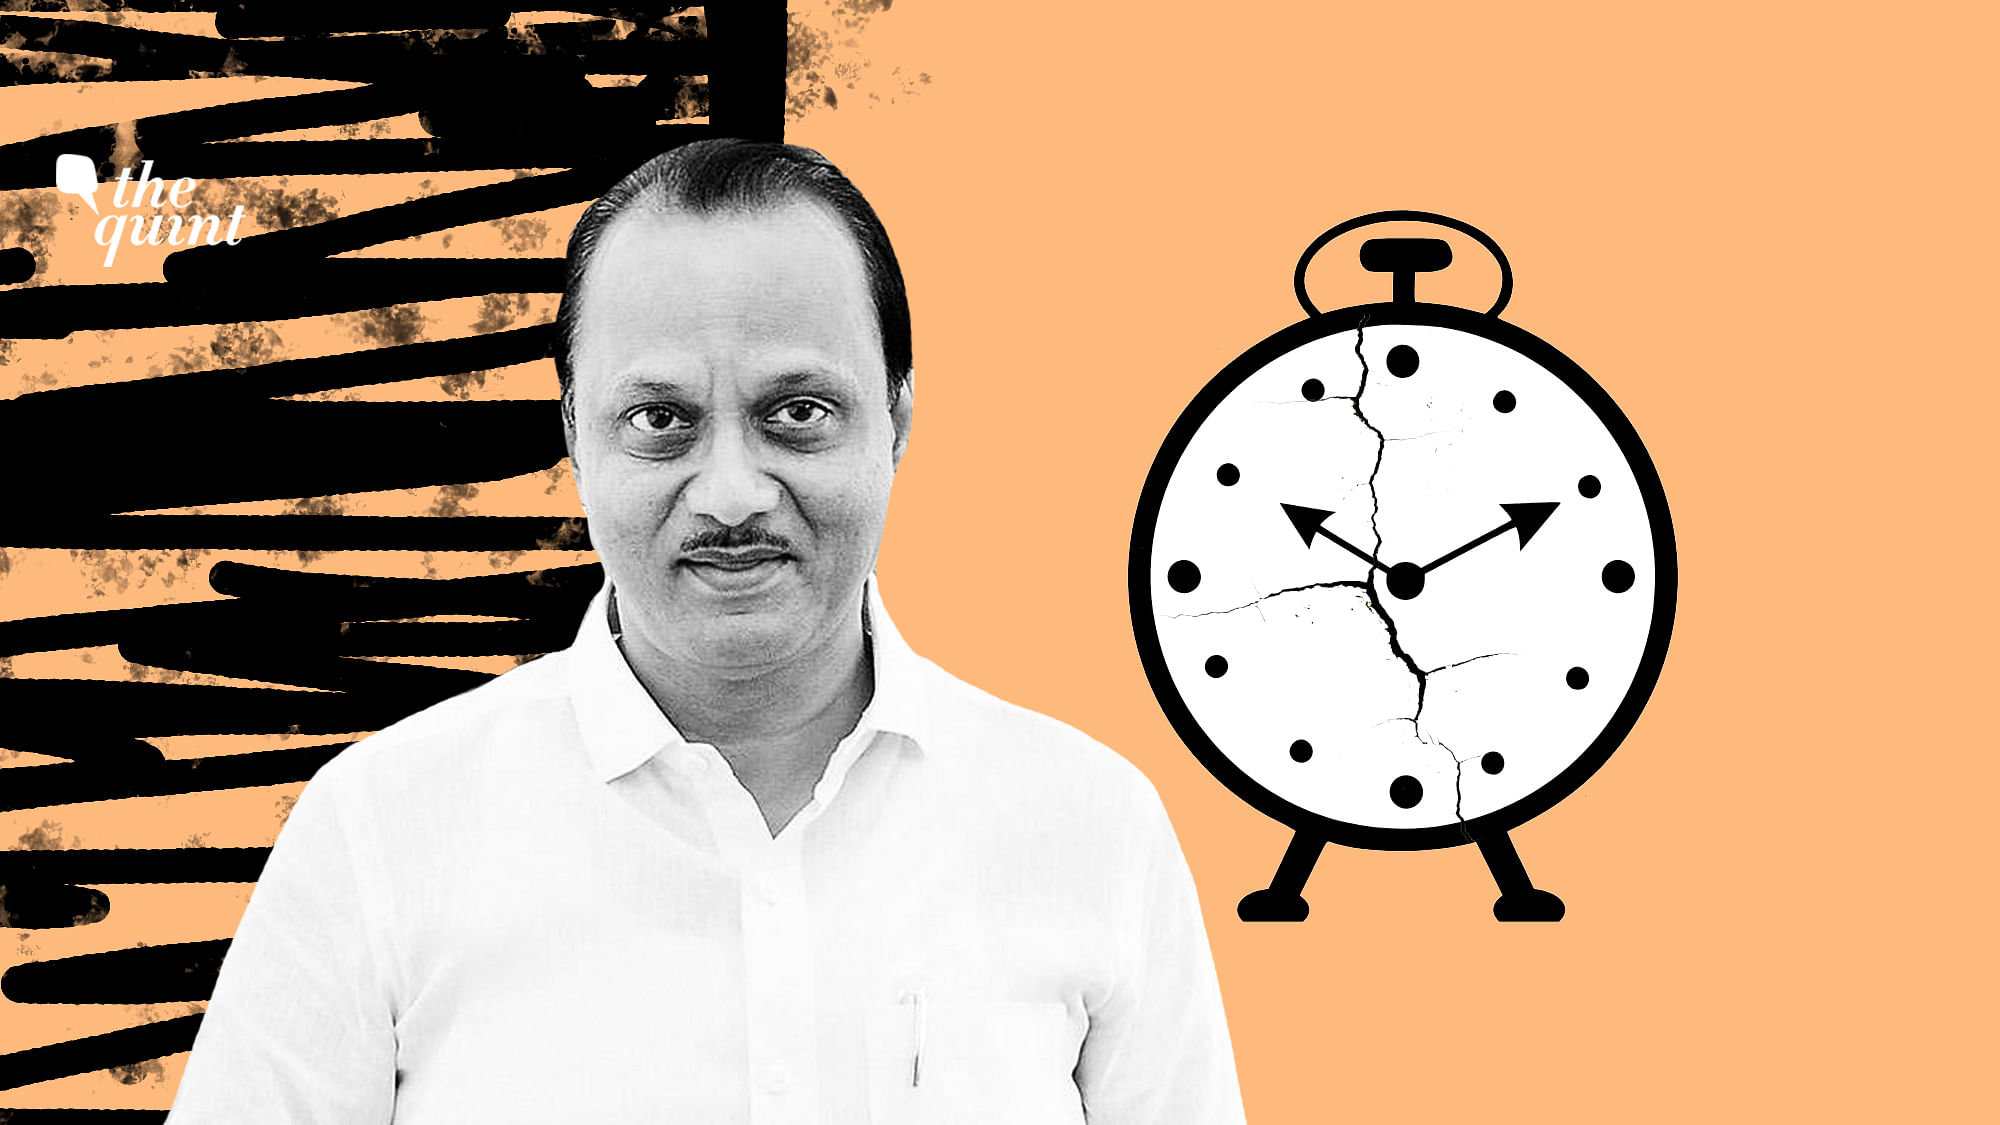 Image of Ajit Pawar and NCP party symbol used for representational purposes.